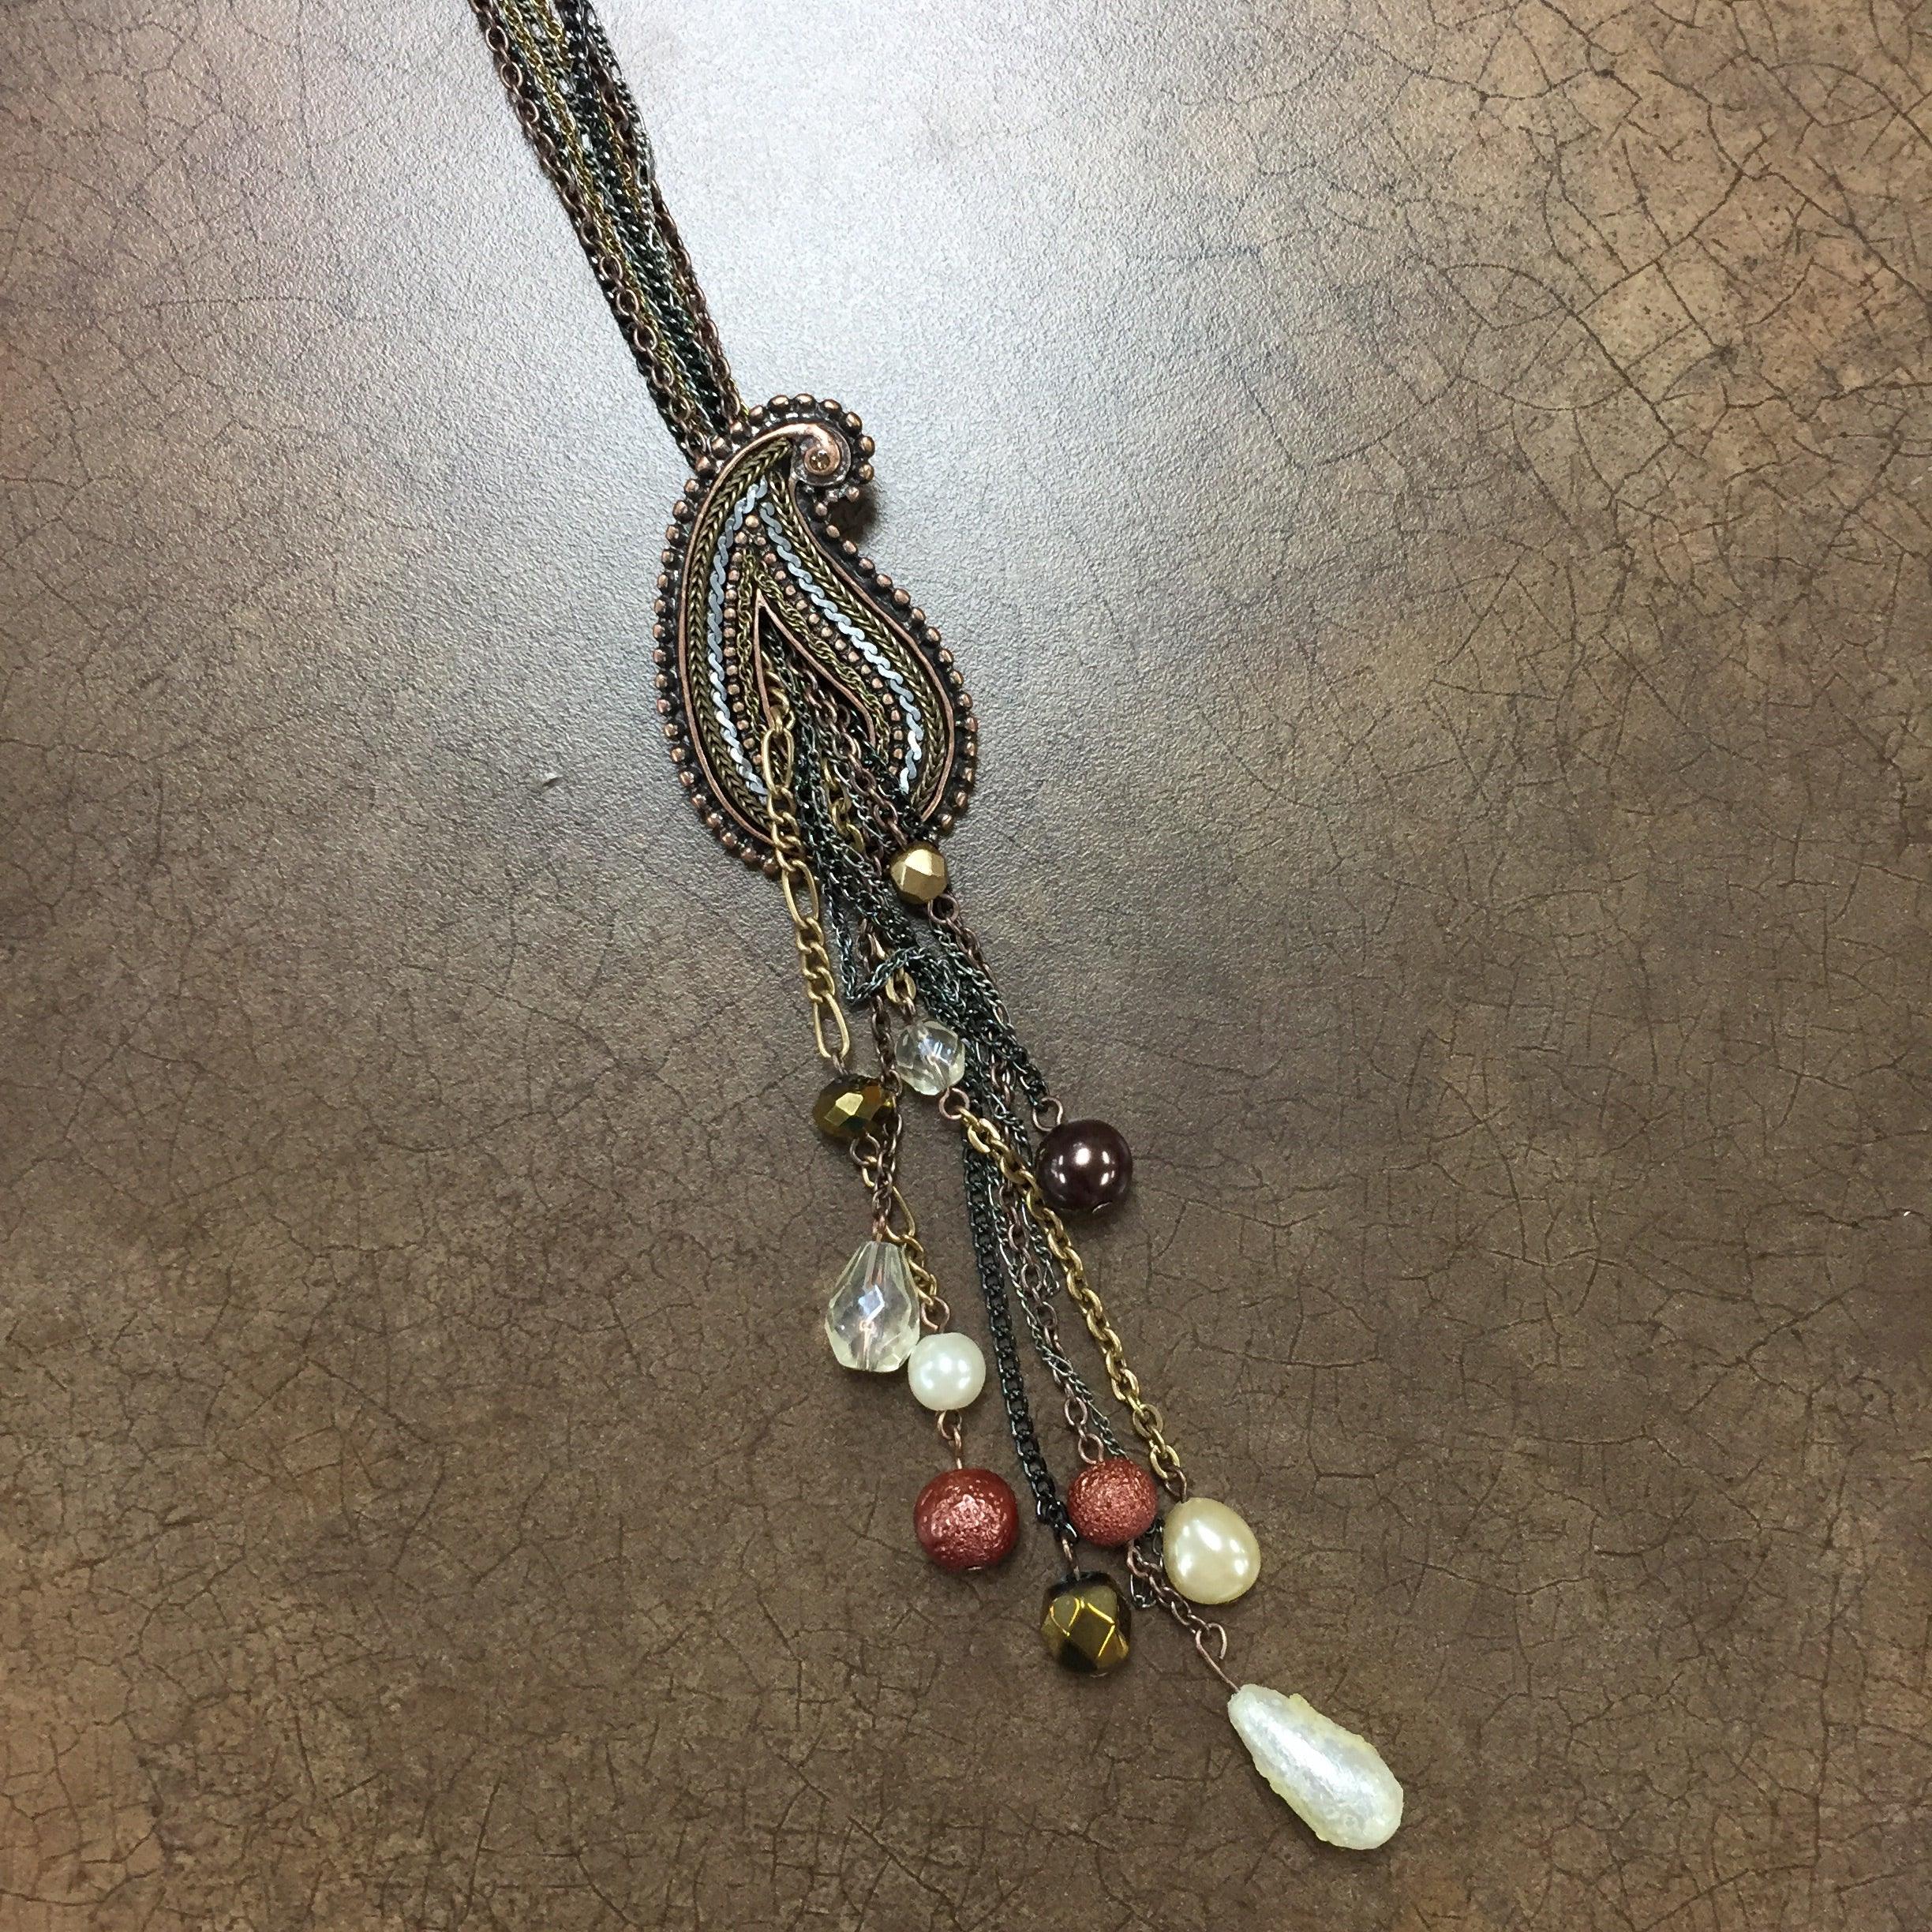 Coldwater Creek Necklace - Gild the Lily